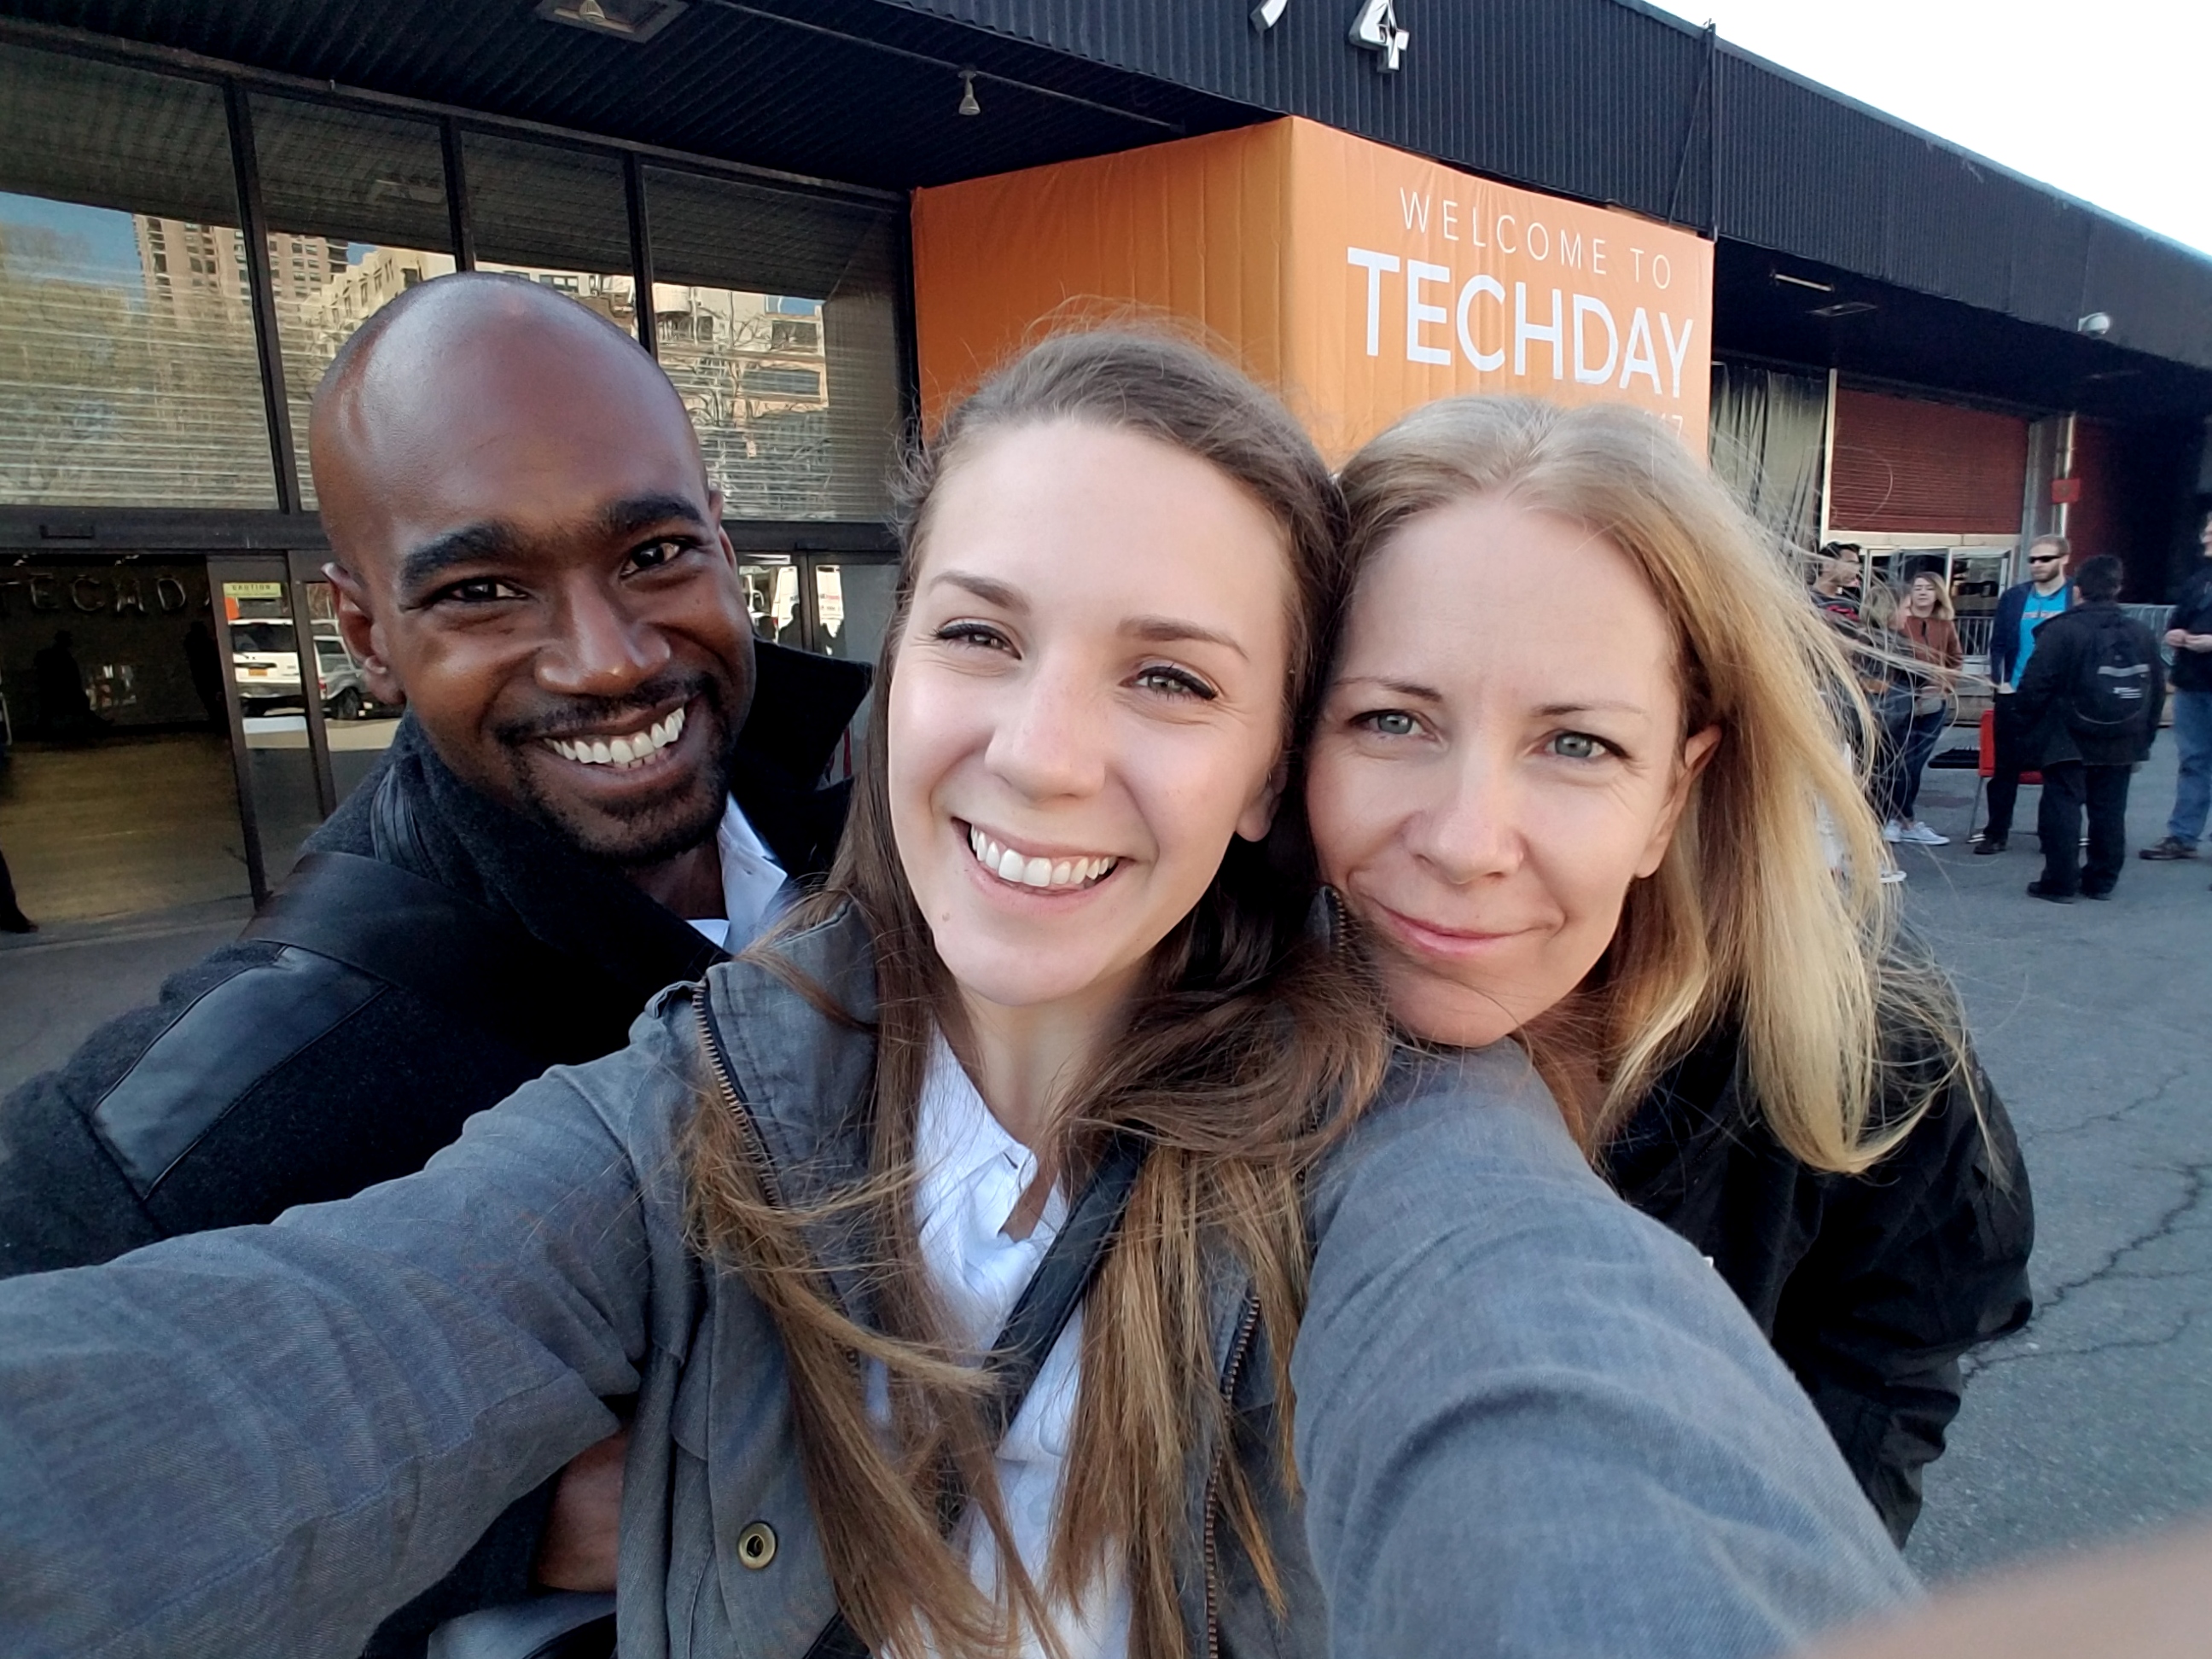 A male Minder and two female Minders take a selfie in front of a sign that says "Welcome To Techday."